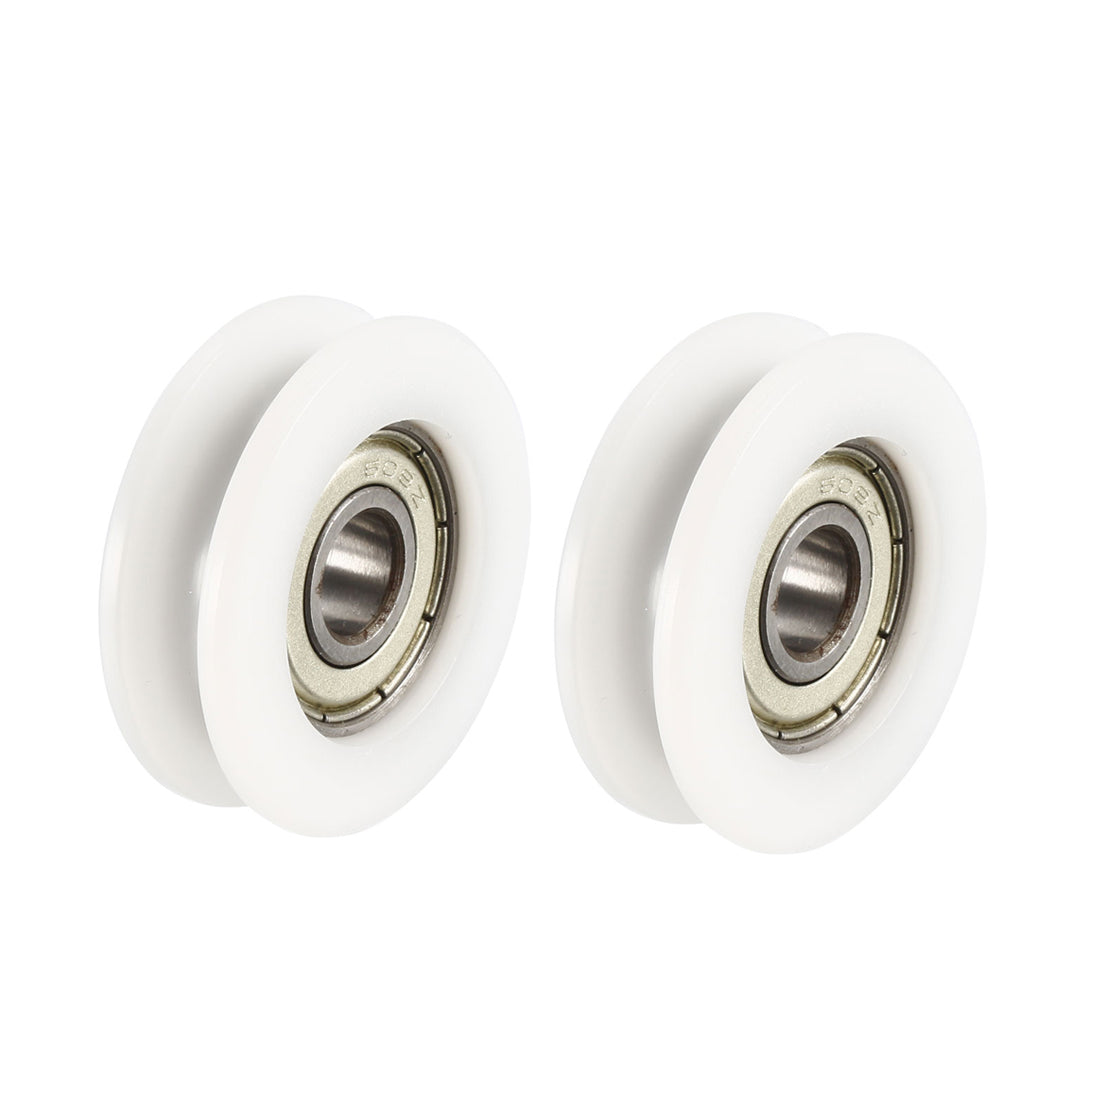 uxcell Uxcell 2.5mm Deep Metal V Groove Guide Bearing Pulley Rail Ball Wheel White 8x34x11mm 2pcs